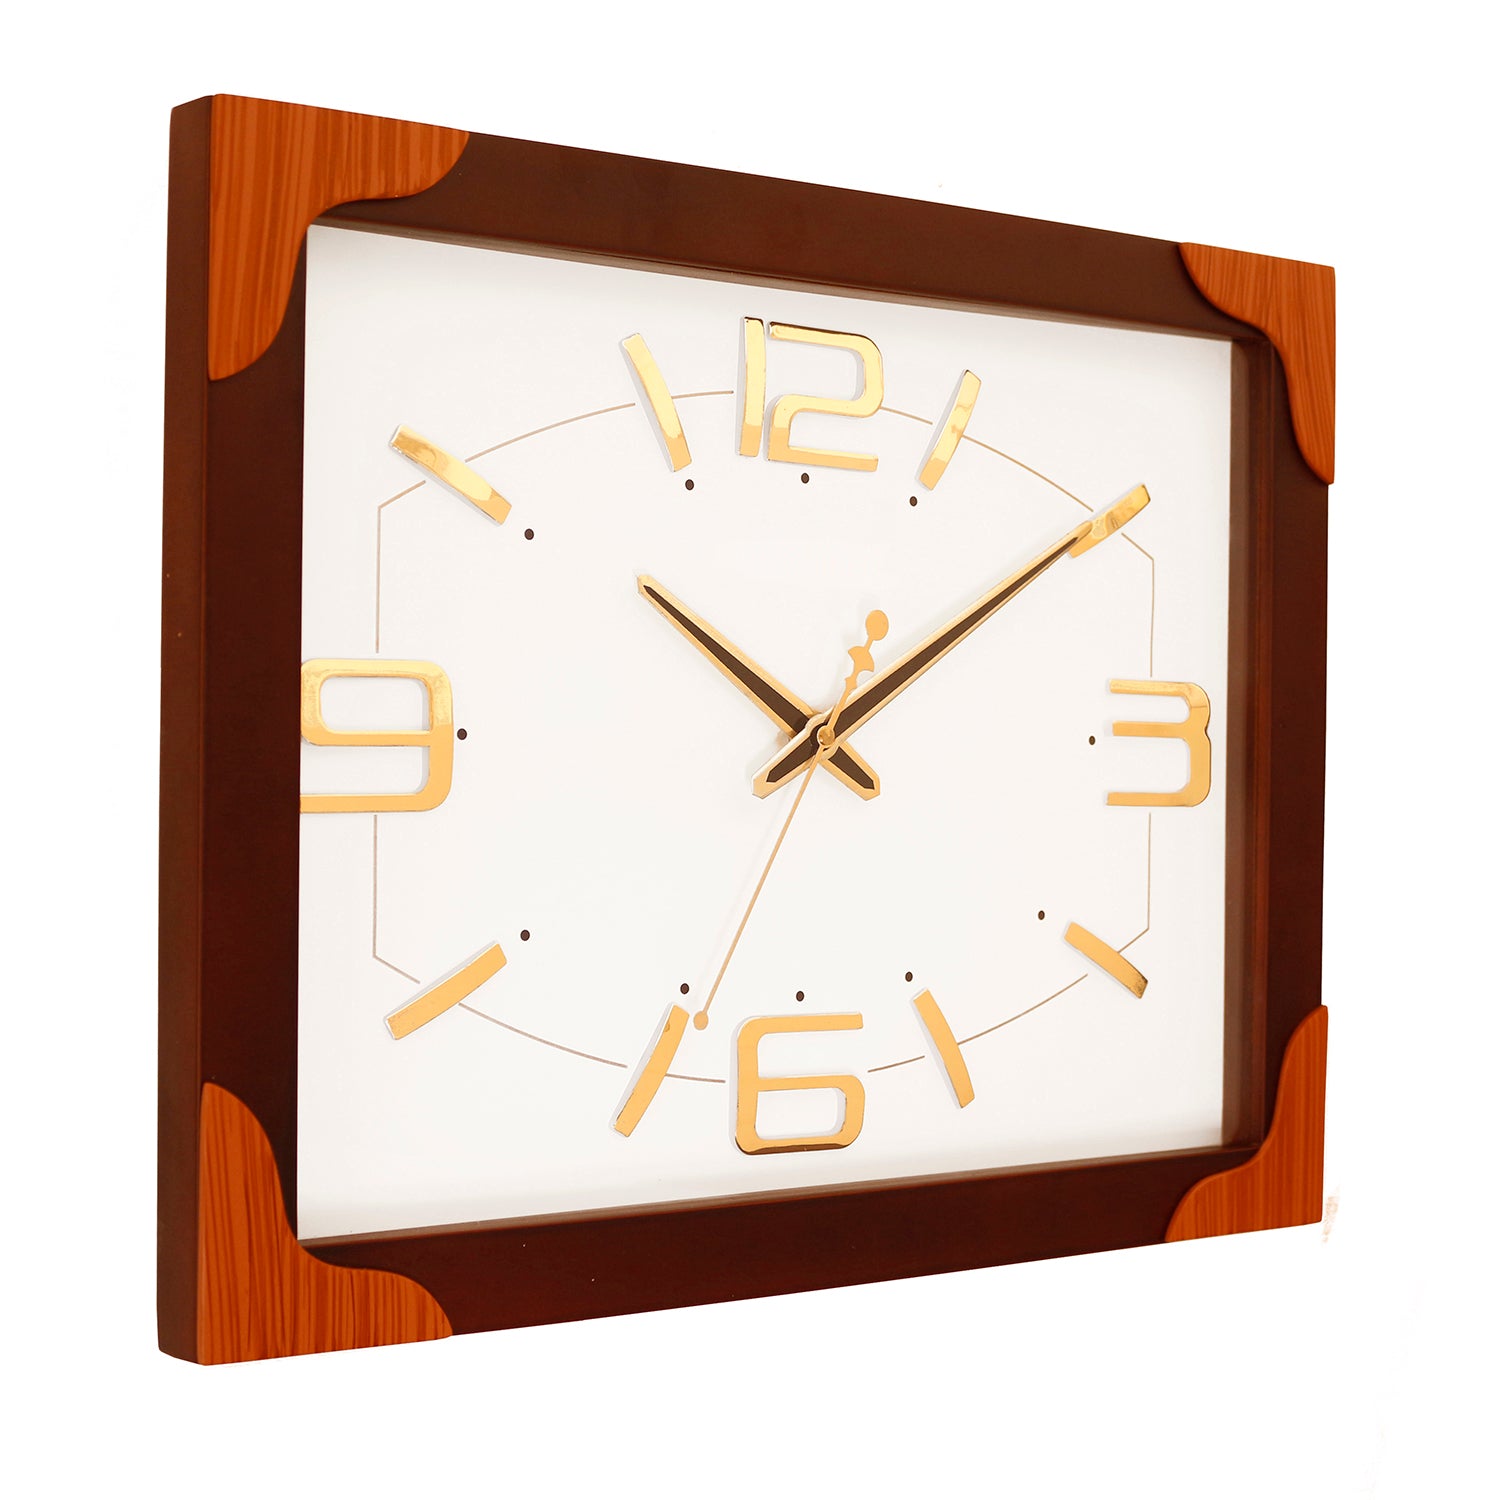 Rosewood rectangle wooden analog wall clock(33 cm x 40.5 cm) 3